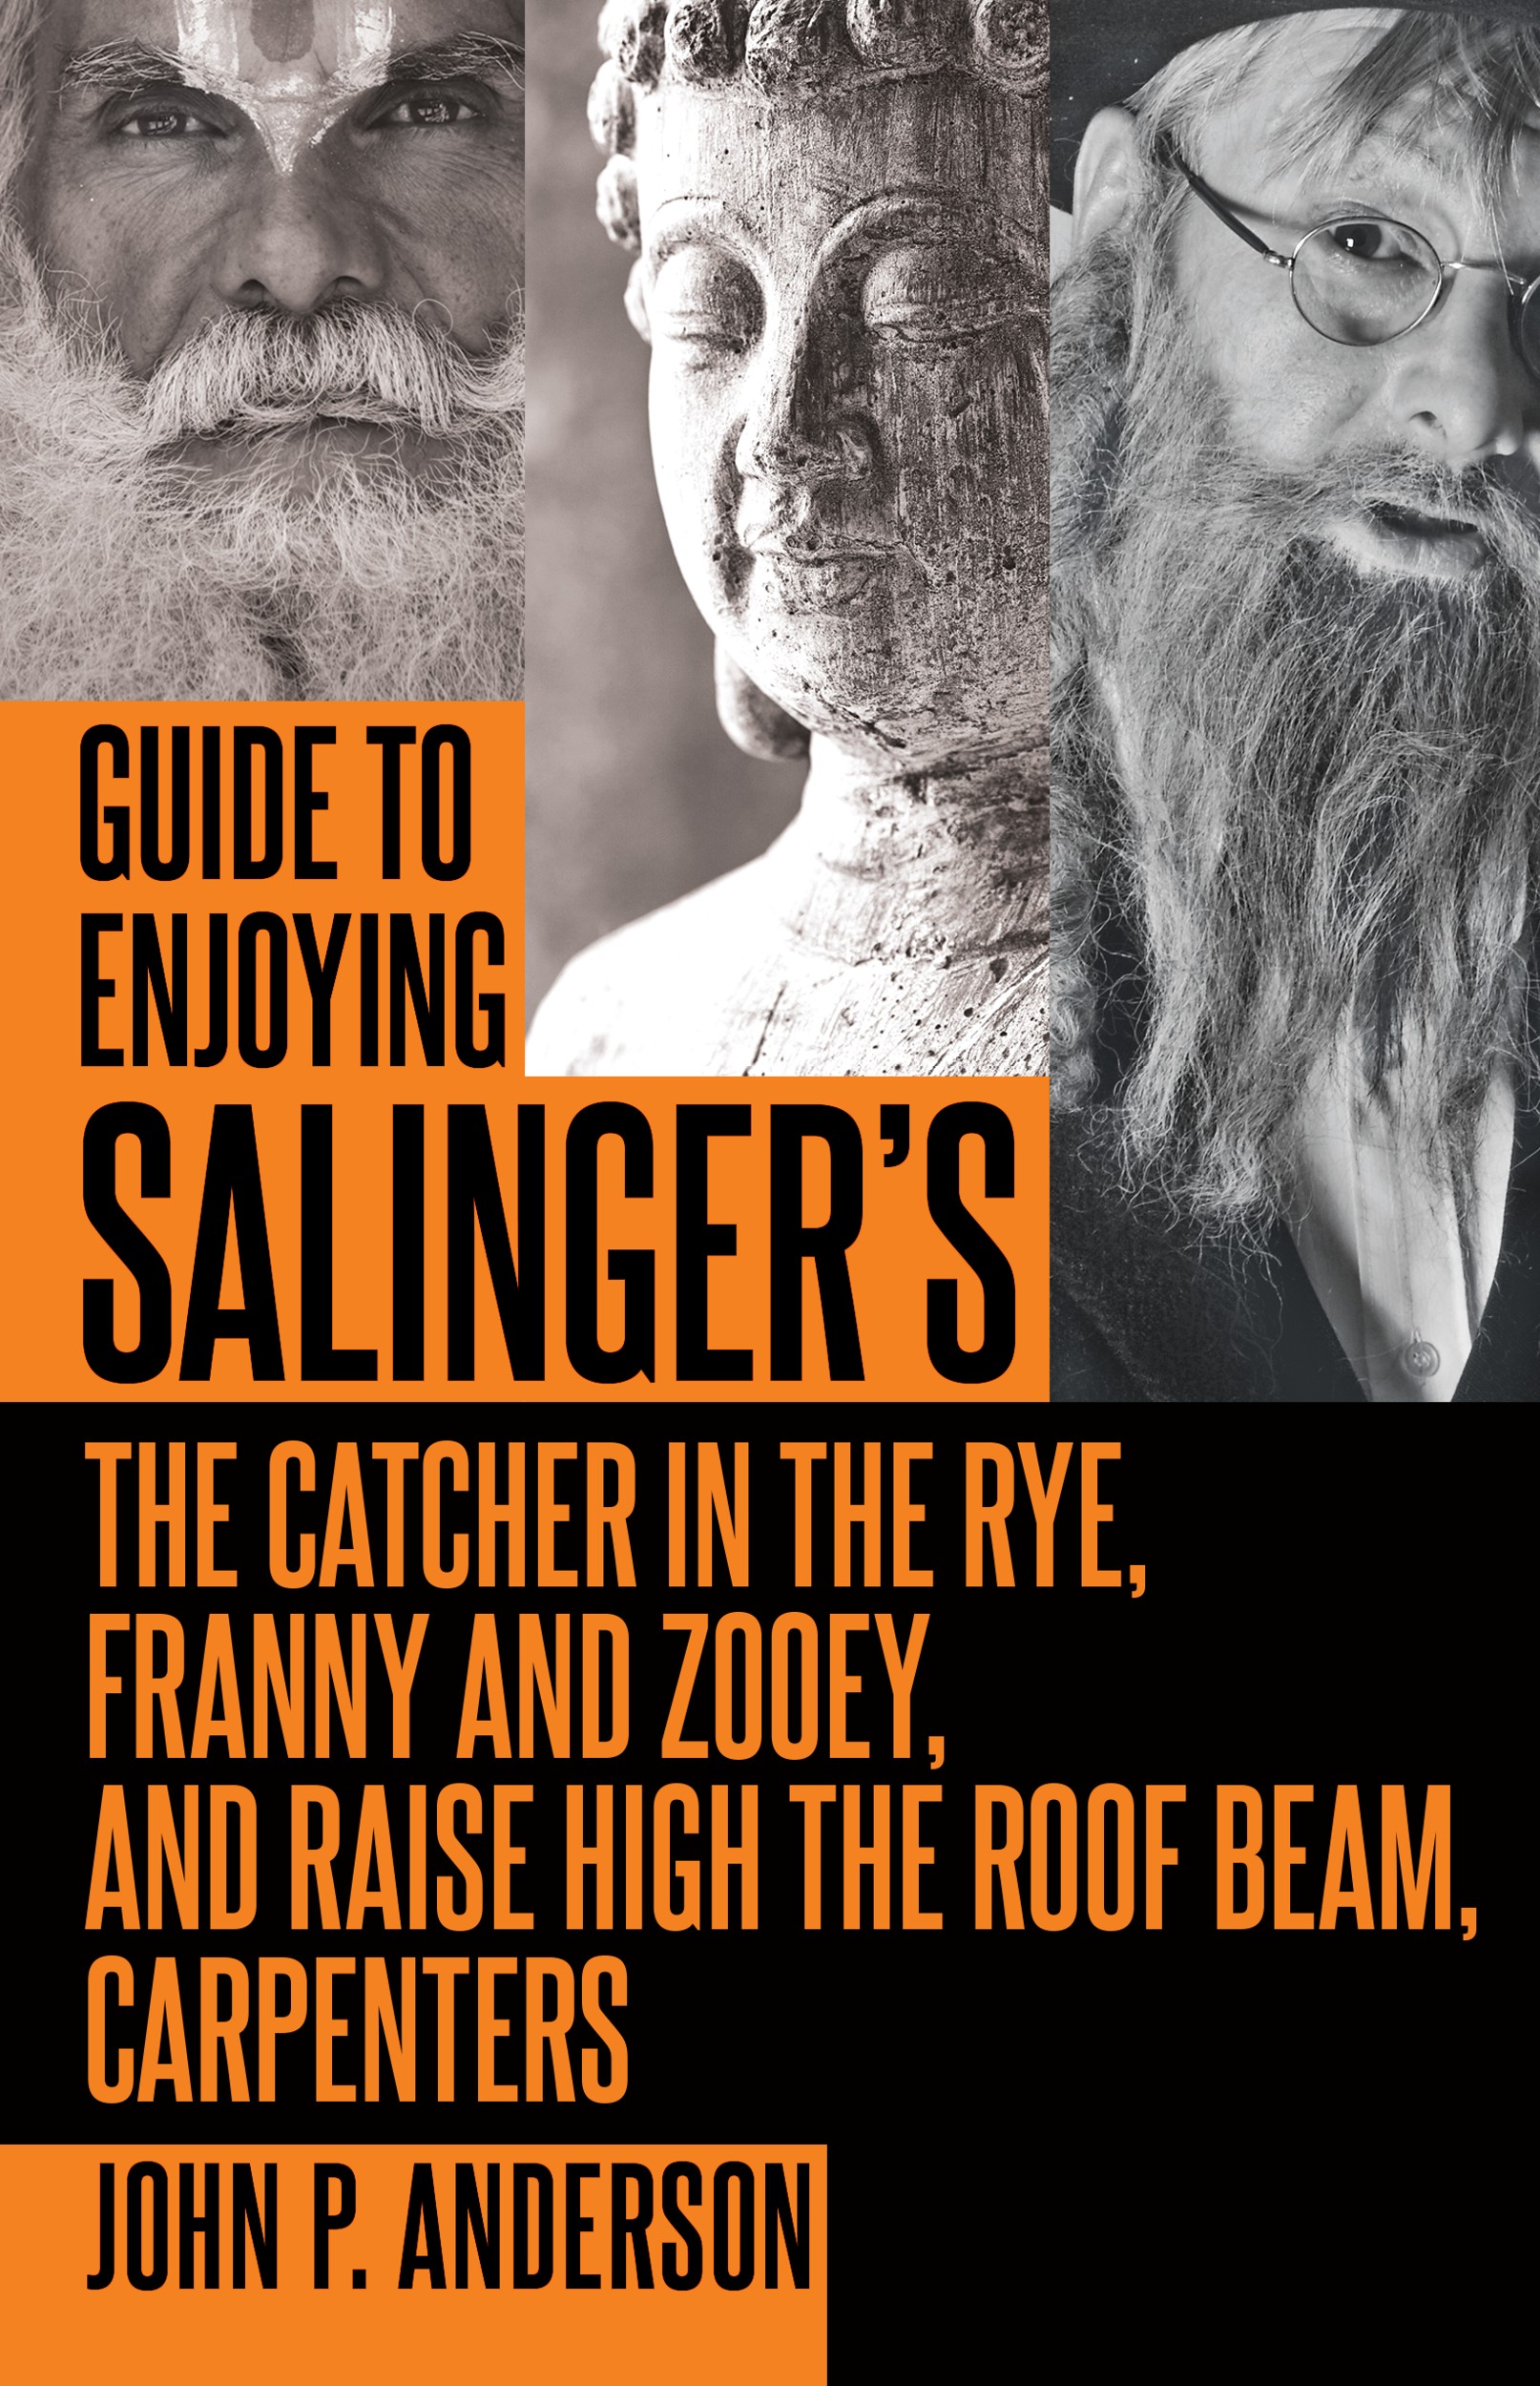 Guide to Enjoying Salinger's The Catcher in the Rye, Franny and Zooey and Raise High the Roof Beam,